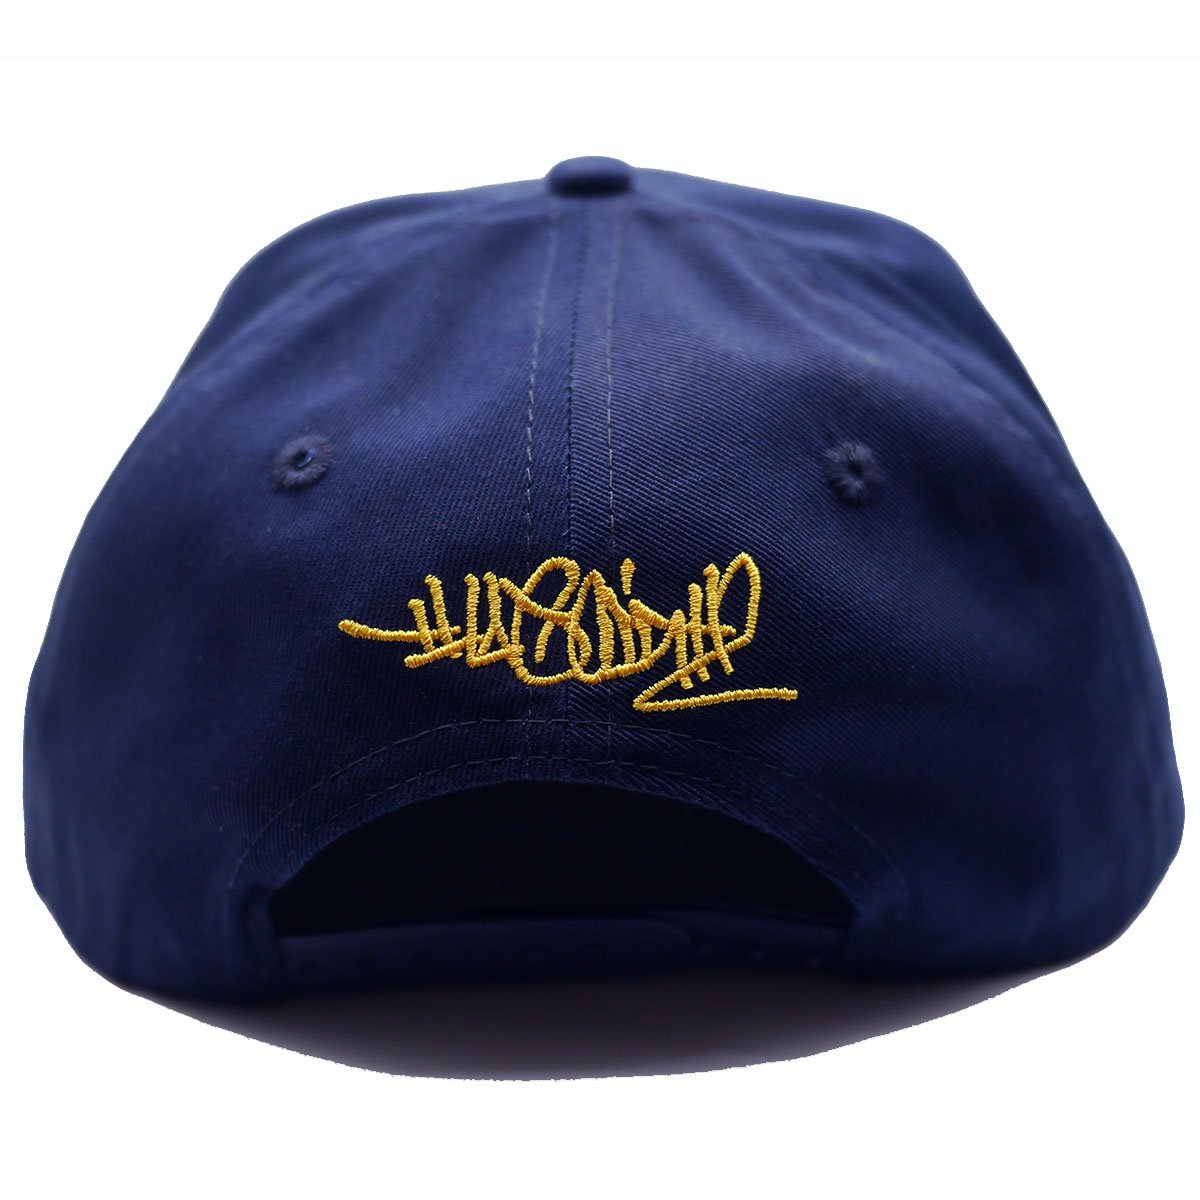 Fedup | HIPHOP WEAR | <img class='new_mark_img1' src='https://img.shop-pro.jp/img/new/icons6.gif' style='border:none;display:inline;margin:0px;padding:0px;width:auto;' />Tha Jointz x Fedup 